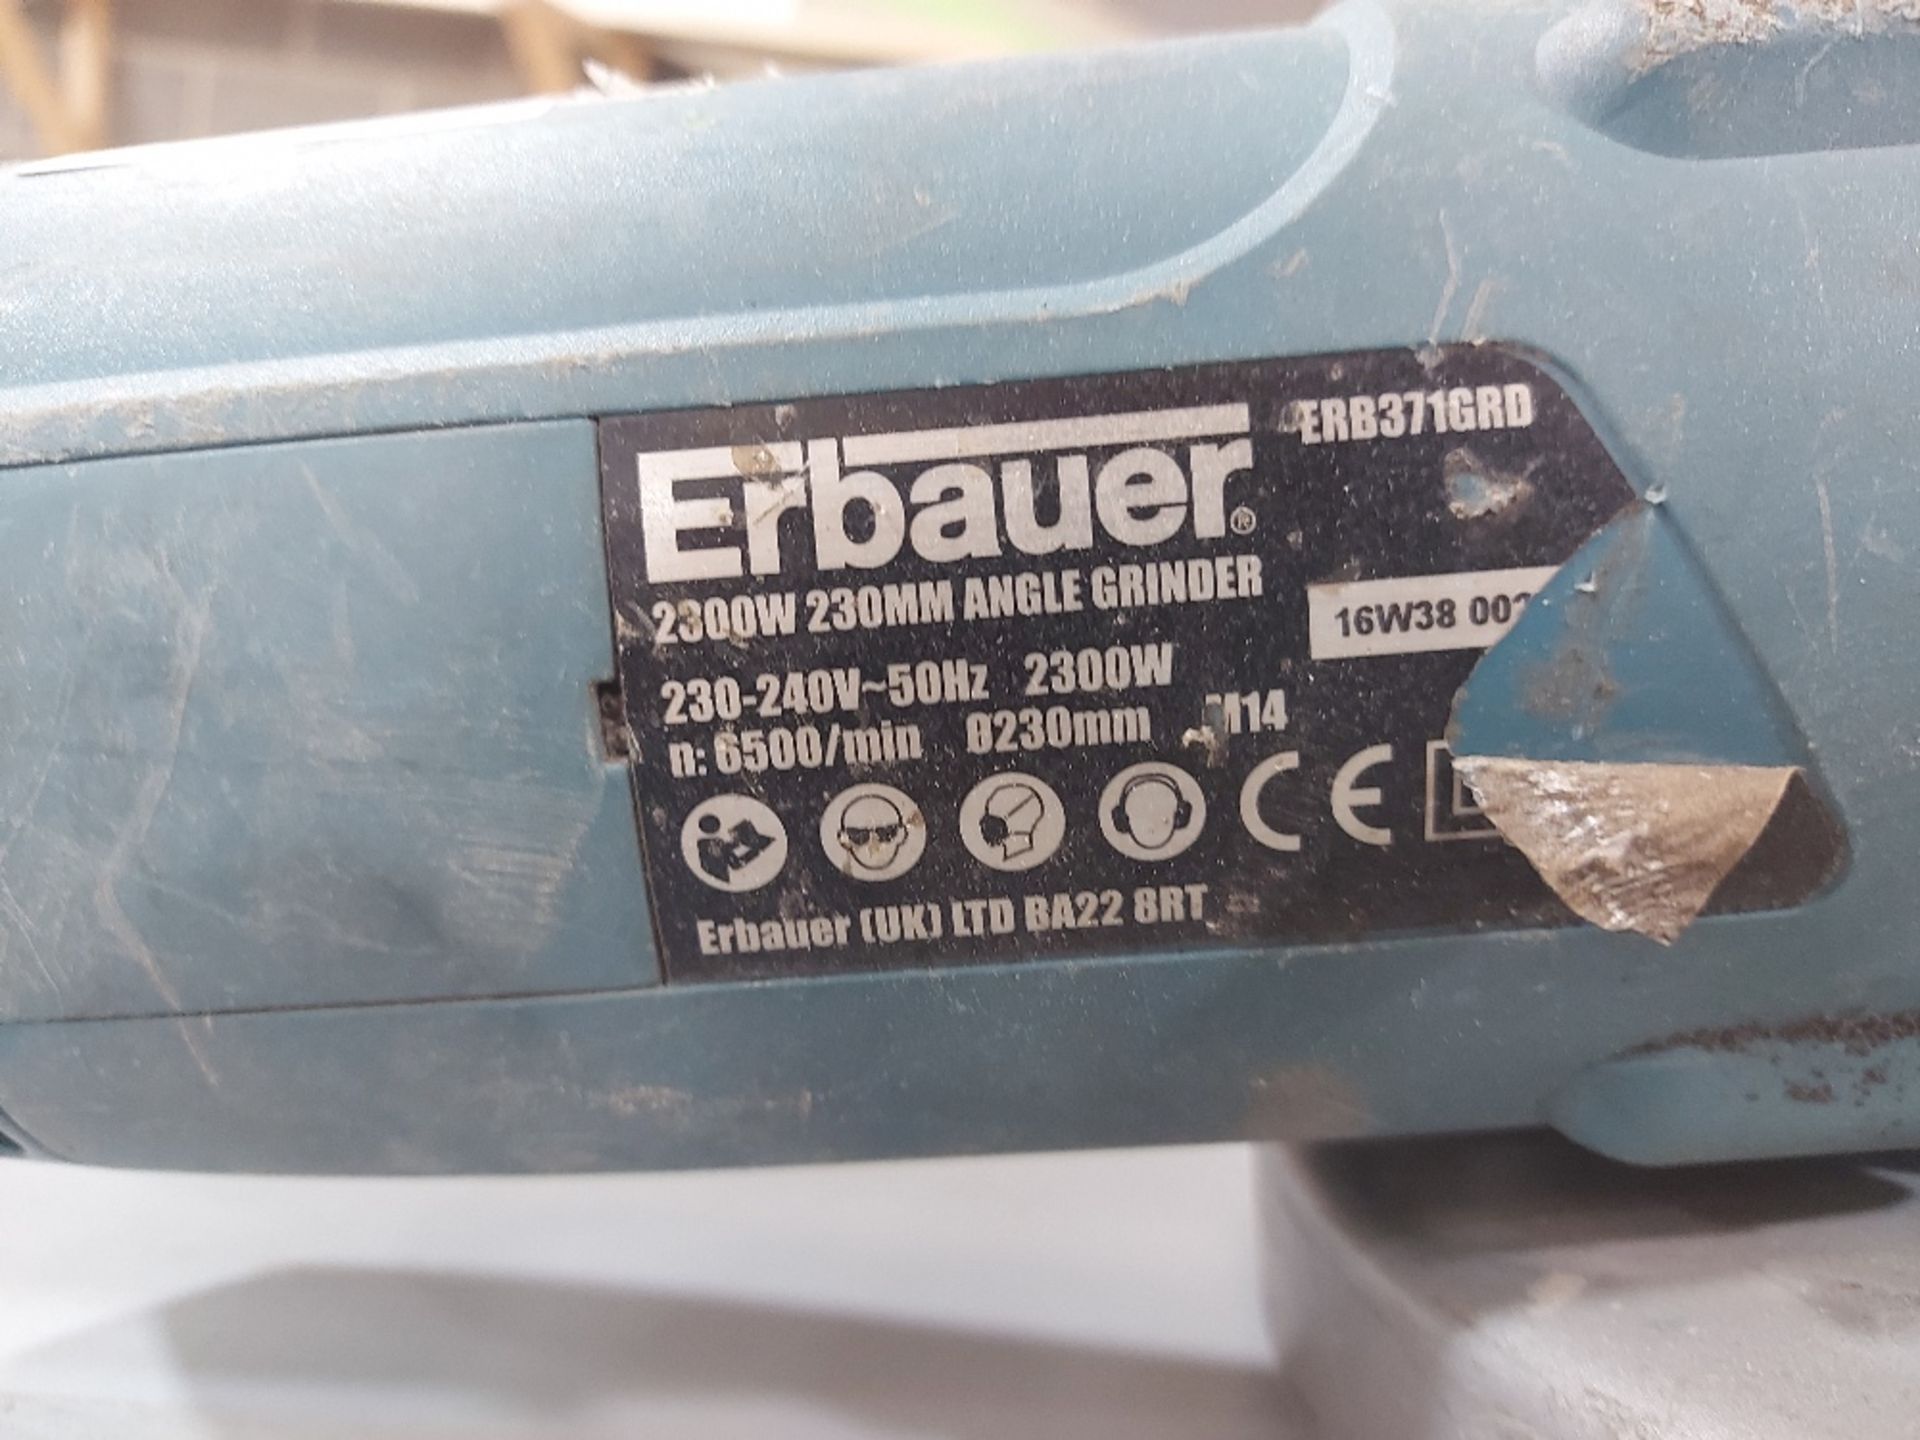 Erbauer ERB371GRB 230mm Angle Grinder - Image 3 of 3